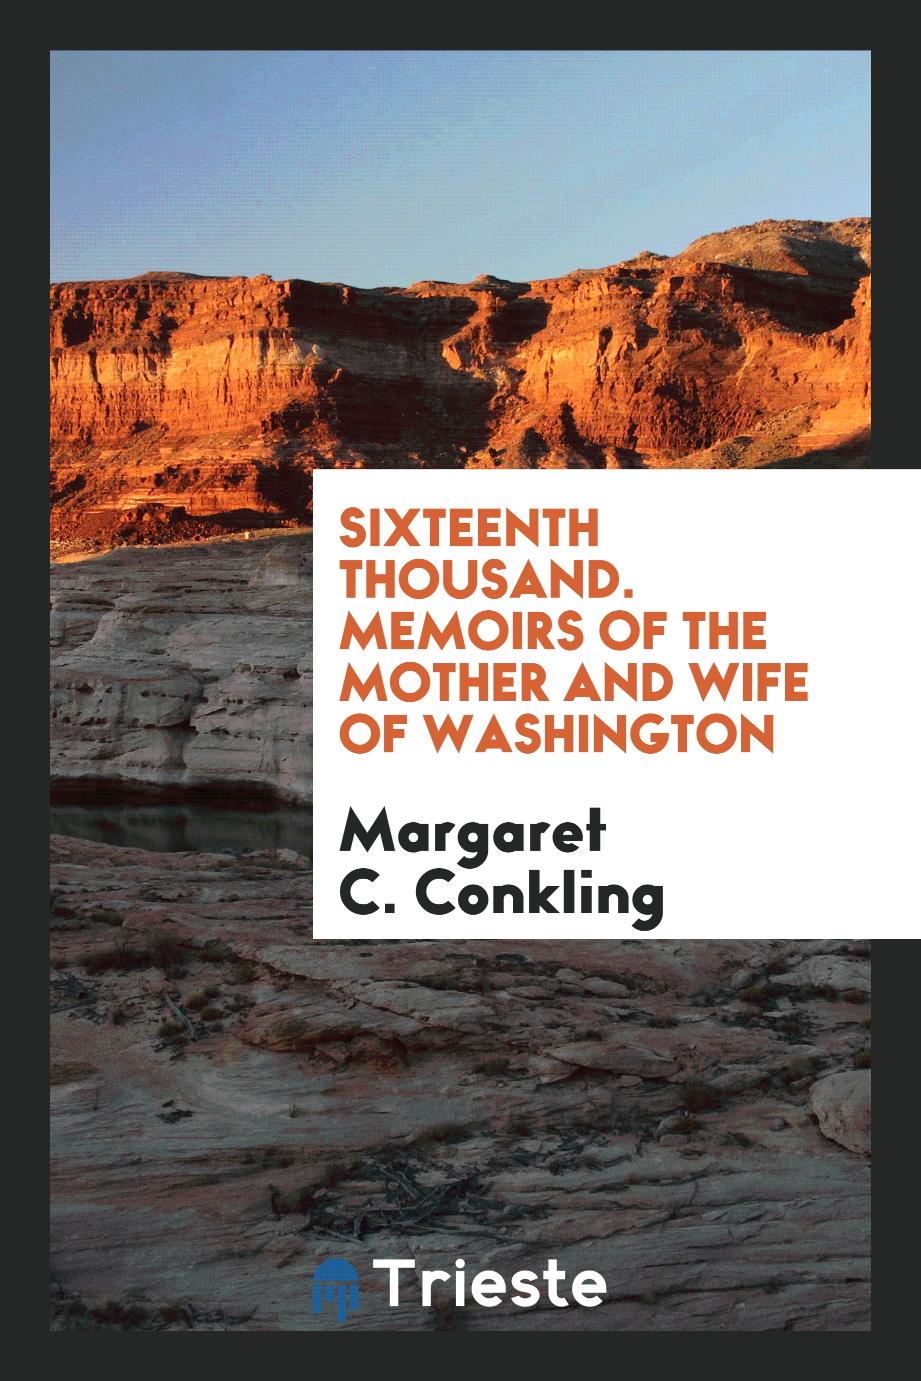 Sixteenth Thousand. Memoirs of the Mother and Wife of Washington